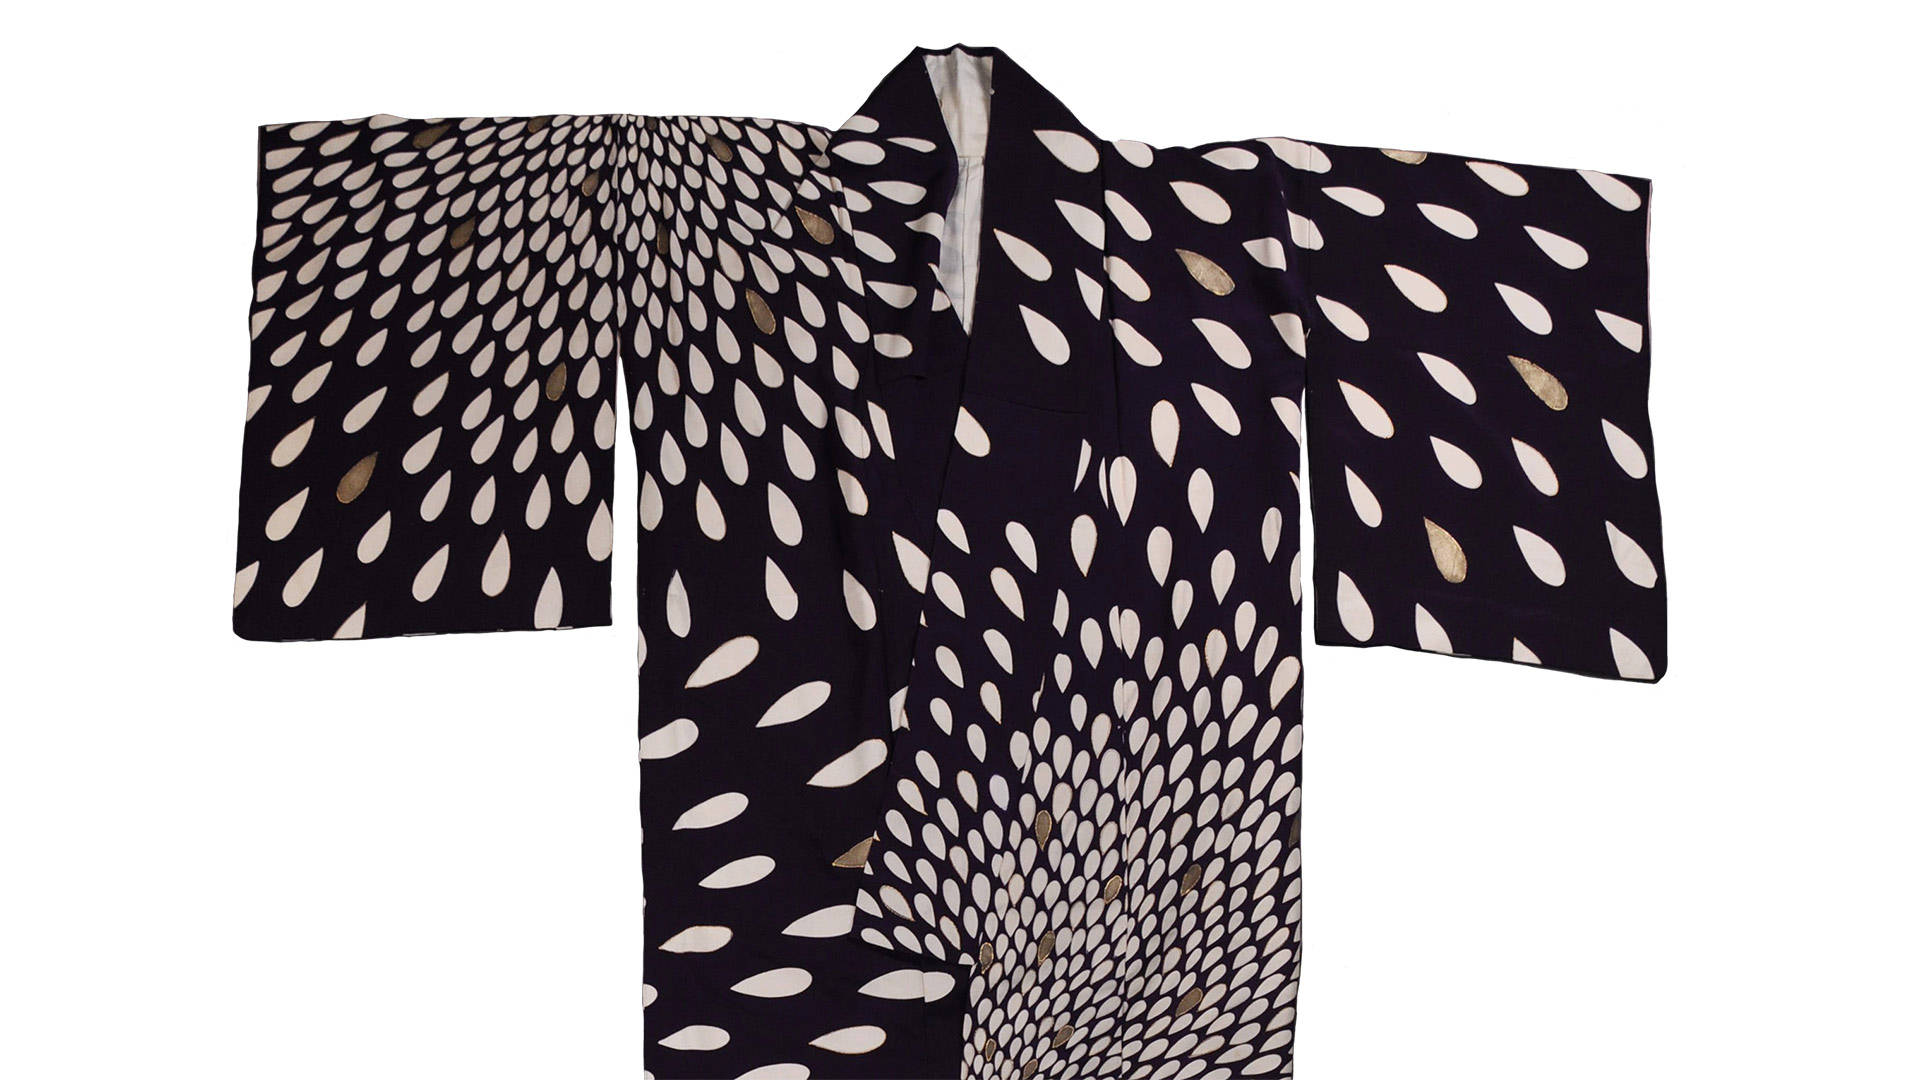 Japanese traditional clothing Kimono, black in color, populated with cream colored petals 